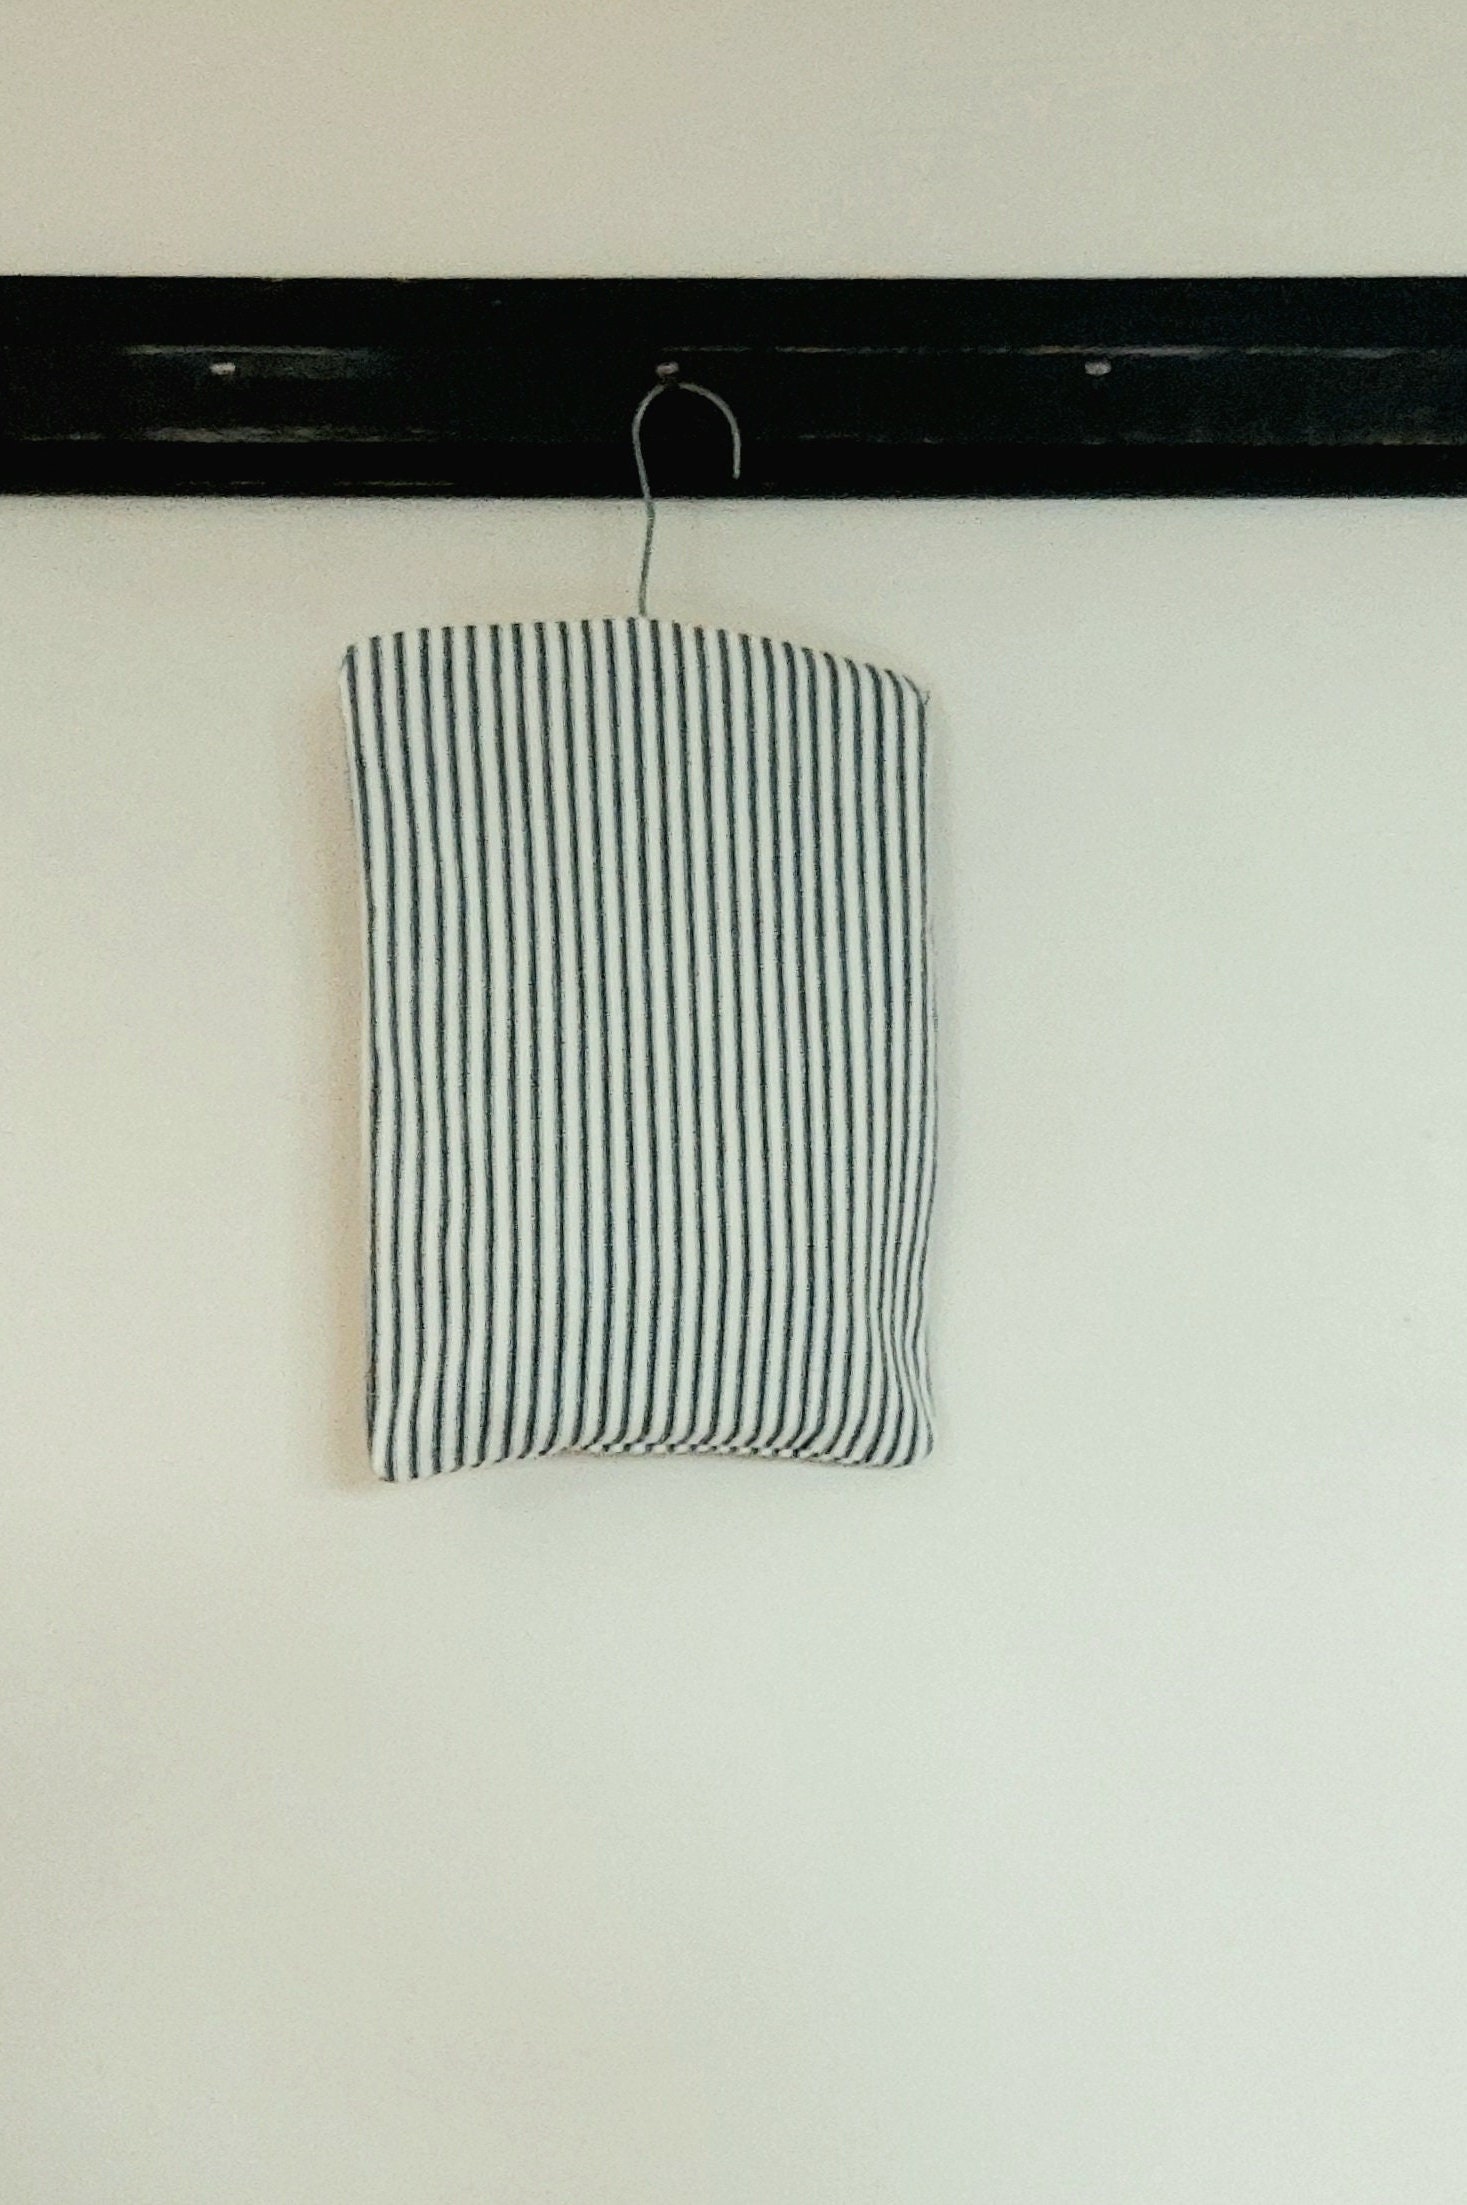 Hand Made Laundry Peg Bag With Wooden Hanger Funky Retro Linen 